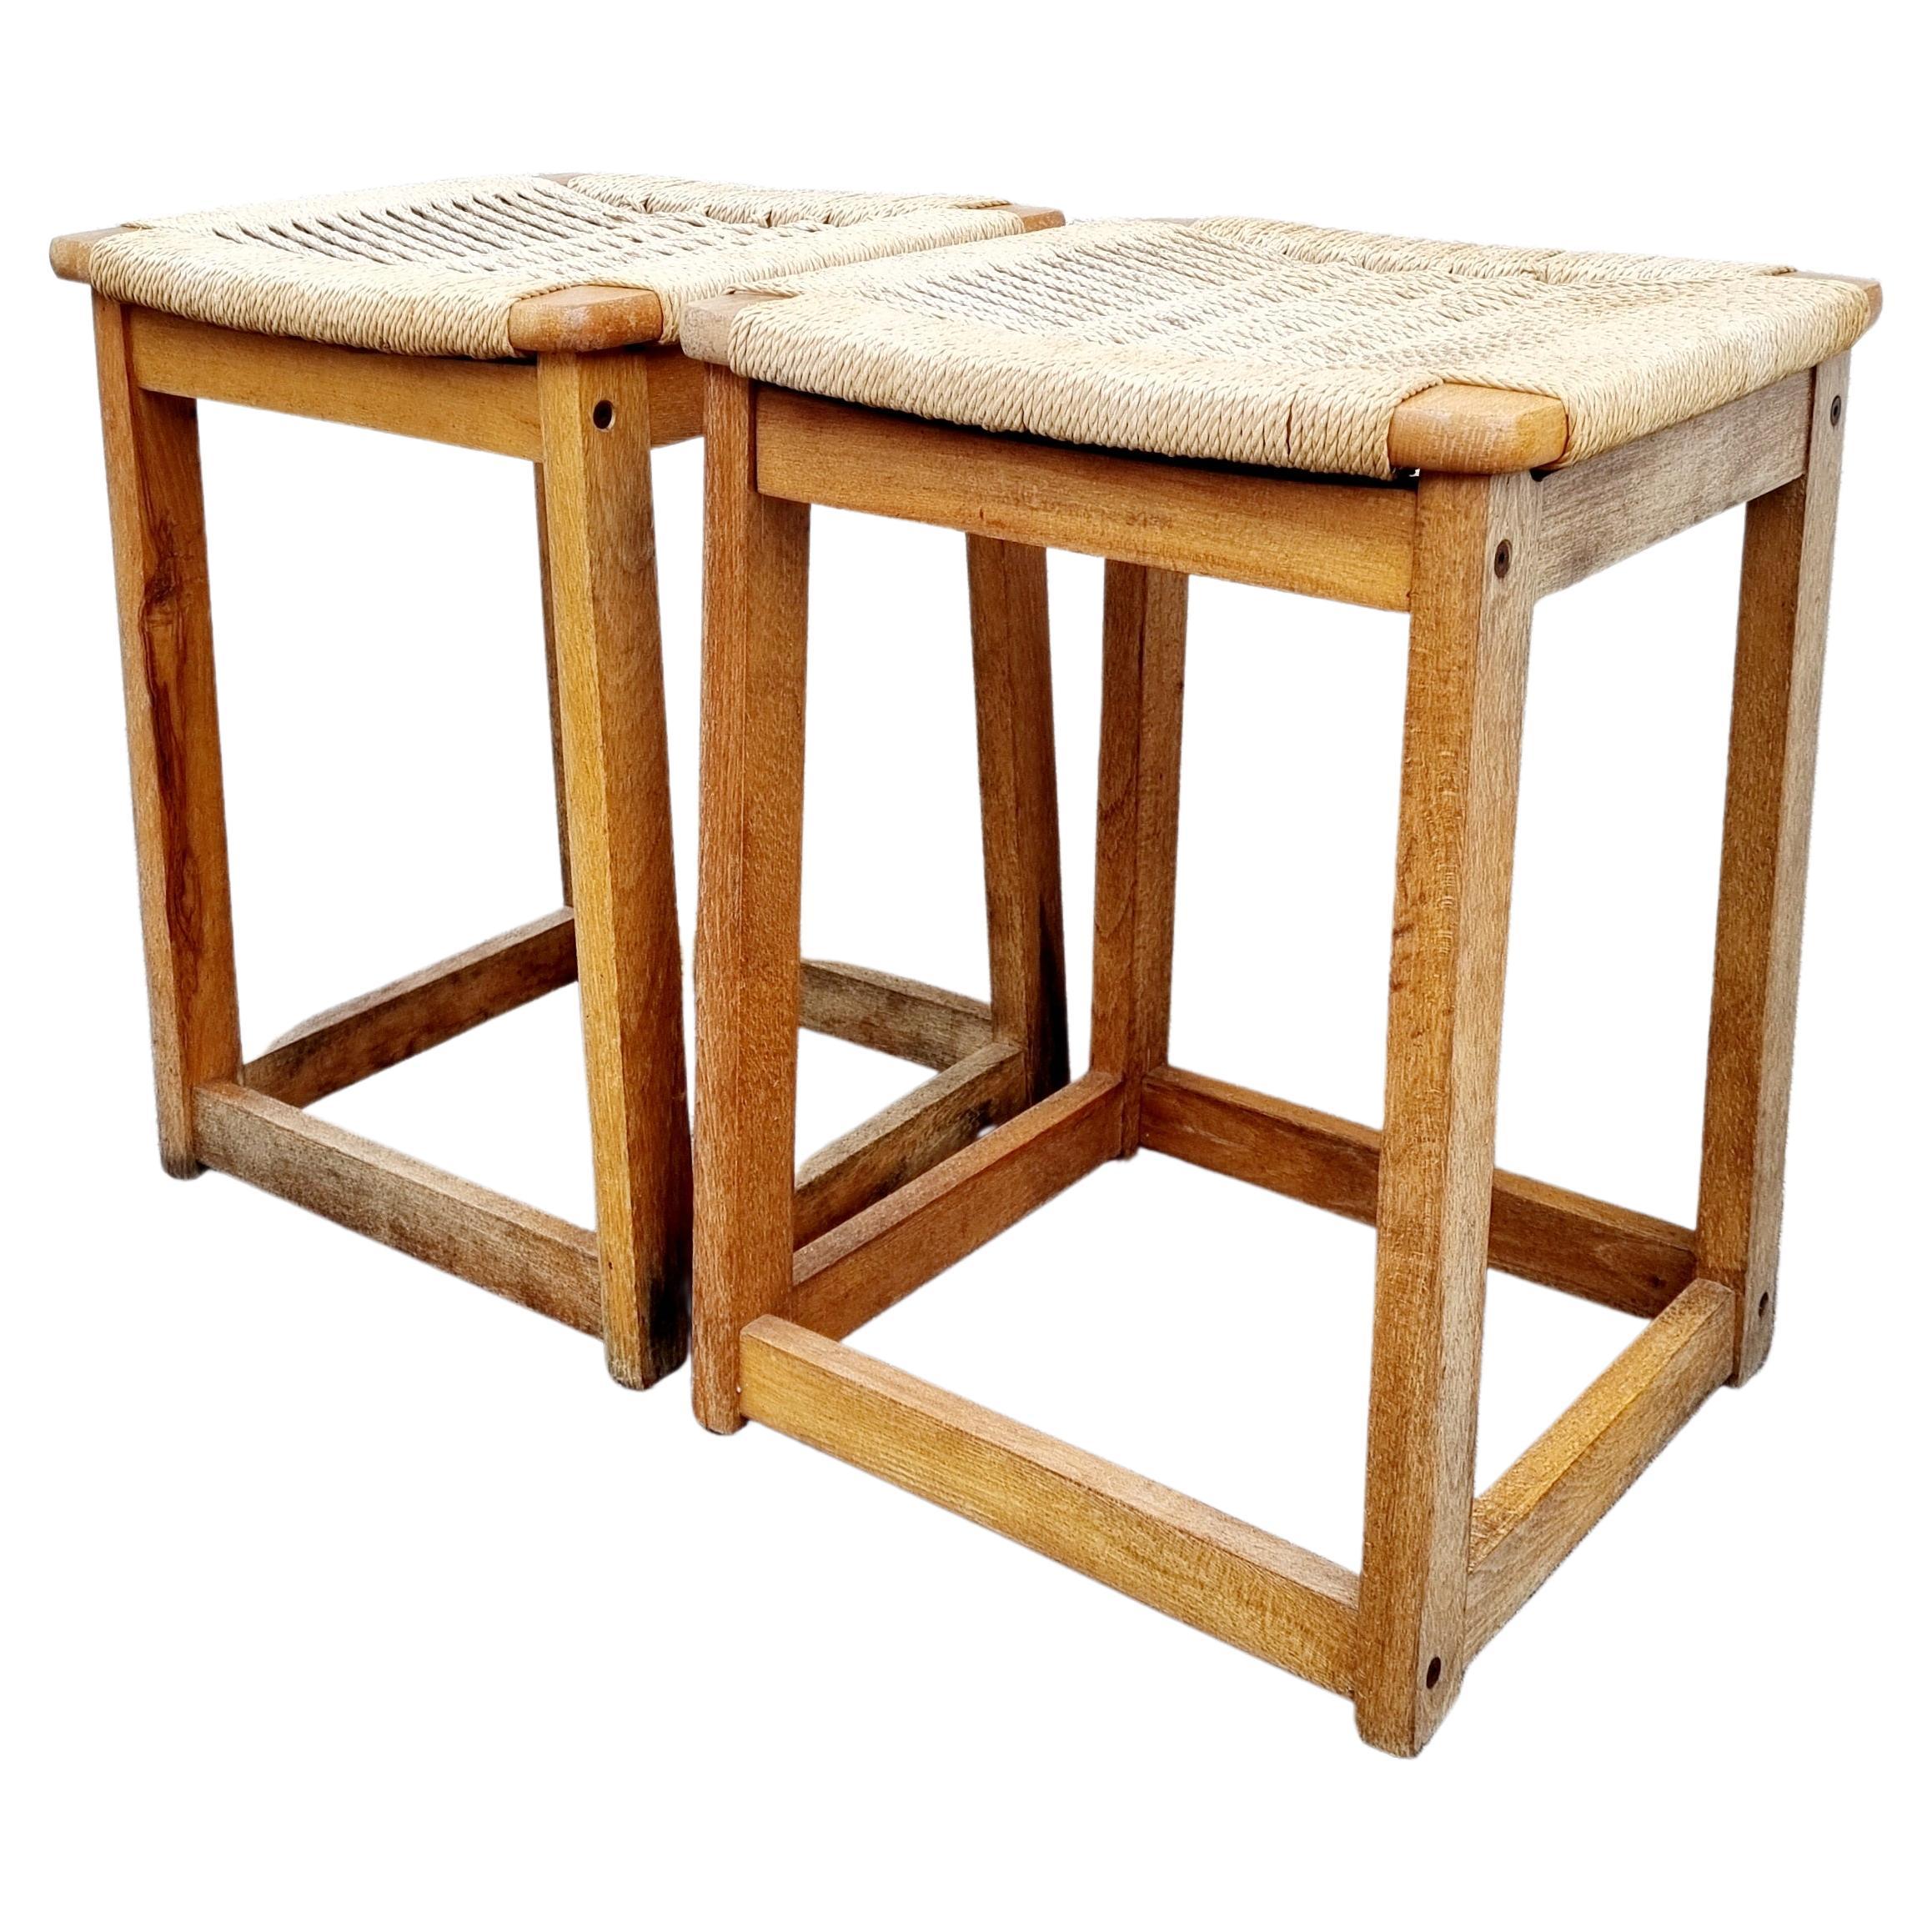 Beautiful vintage Wooden Stools were designed by Ebert Wels in '60s. Scandinavian design.

These retro stools have wooden frame and beige rope seats.
Stools are very comfortable and perfect vintage decoration for every room in your home or office.